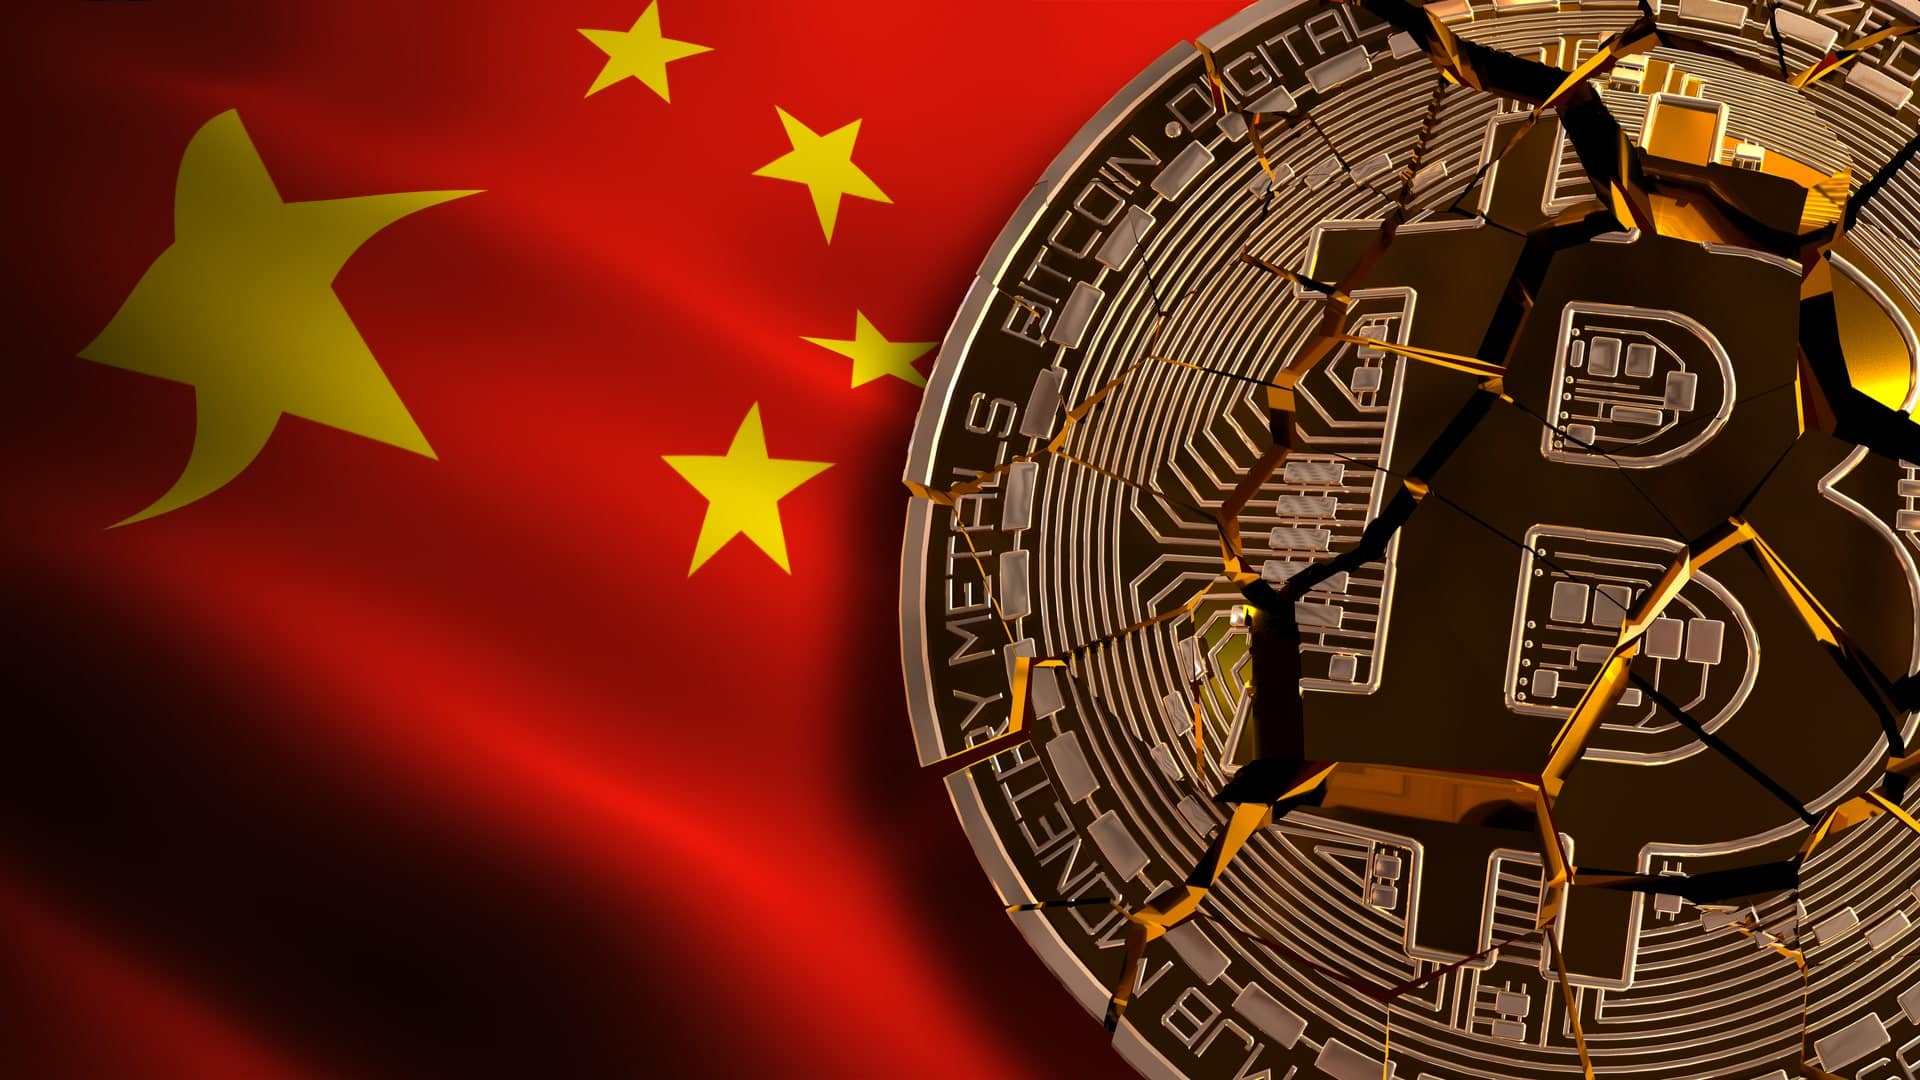 China also plans to ban any investment in cryptocurrency mining